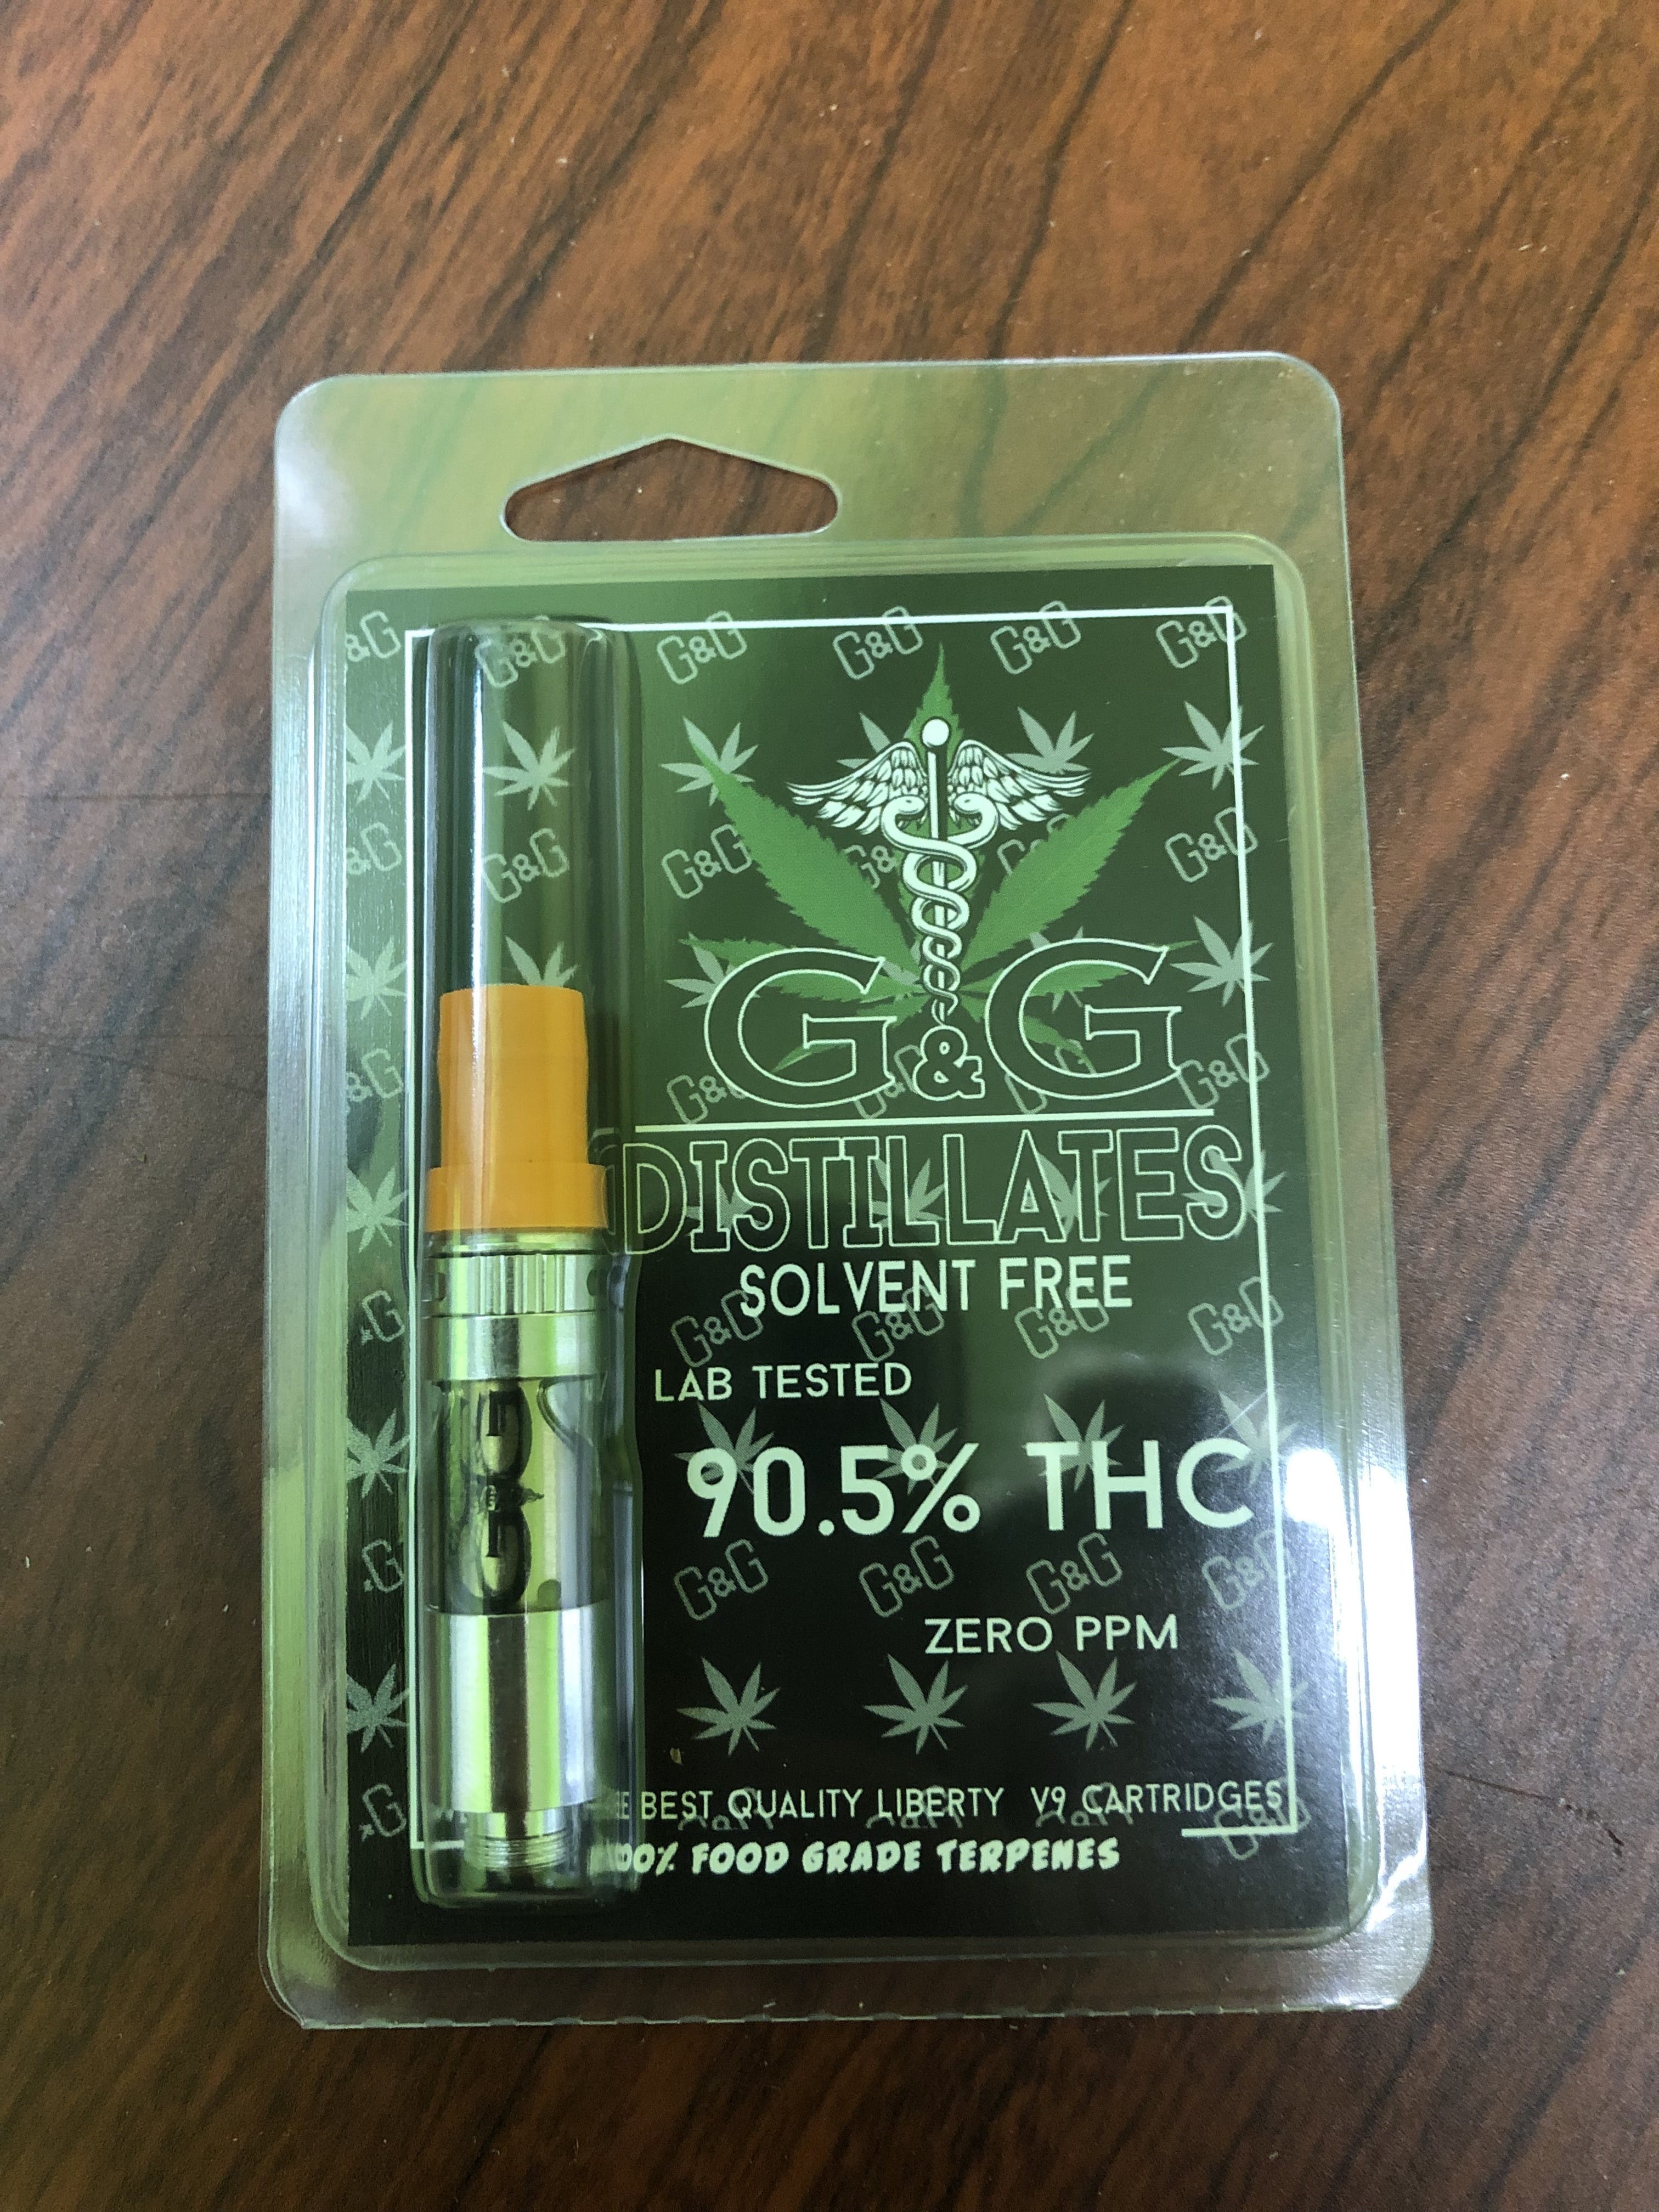 concentrate-gag-distillate-cartridge-90-5-25-thc